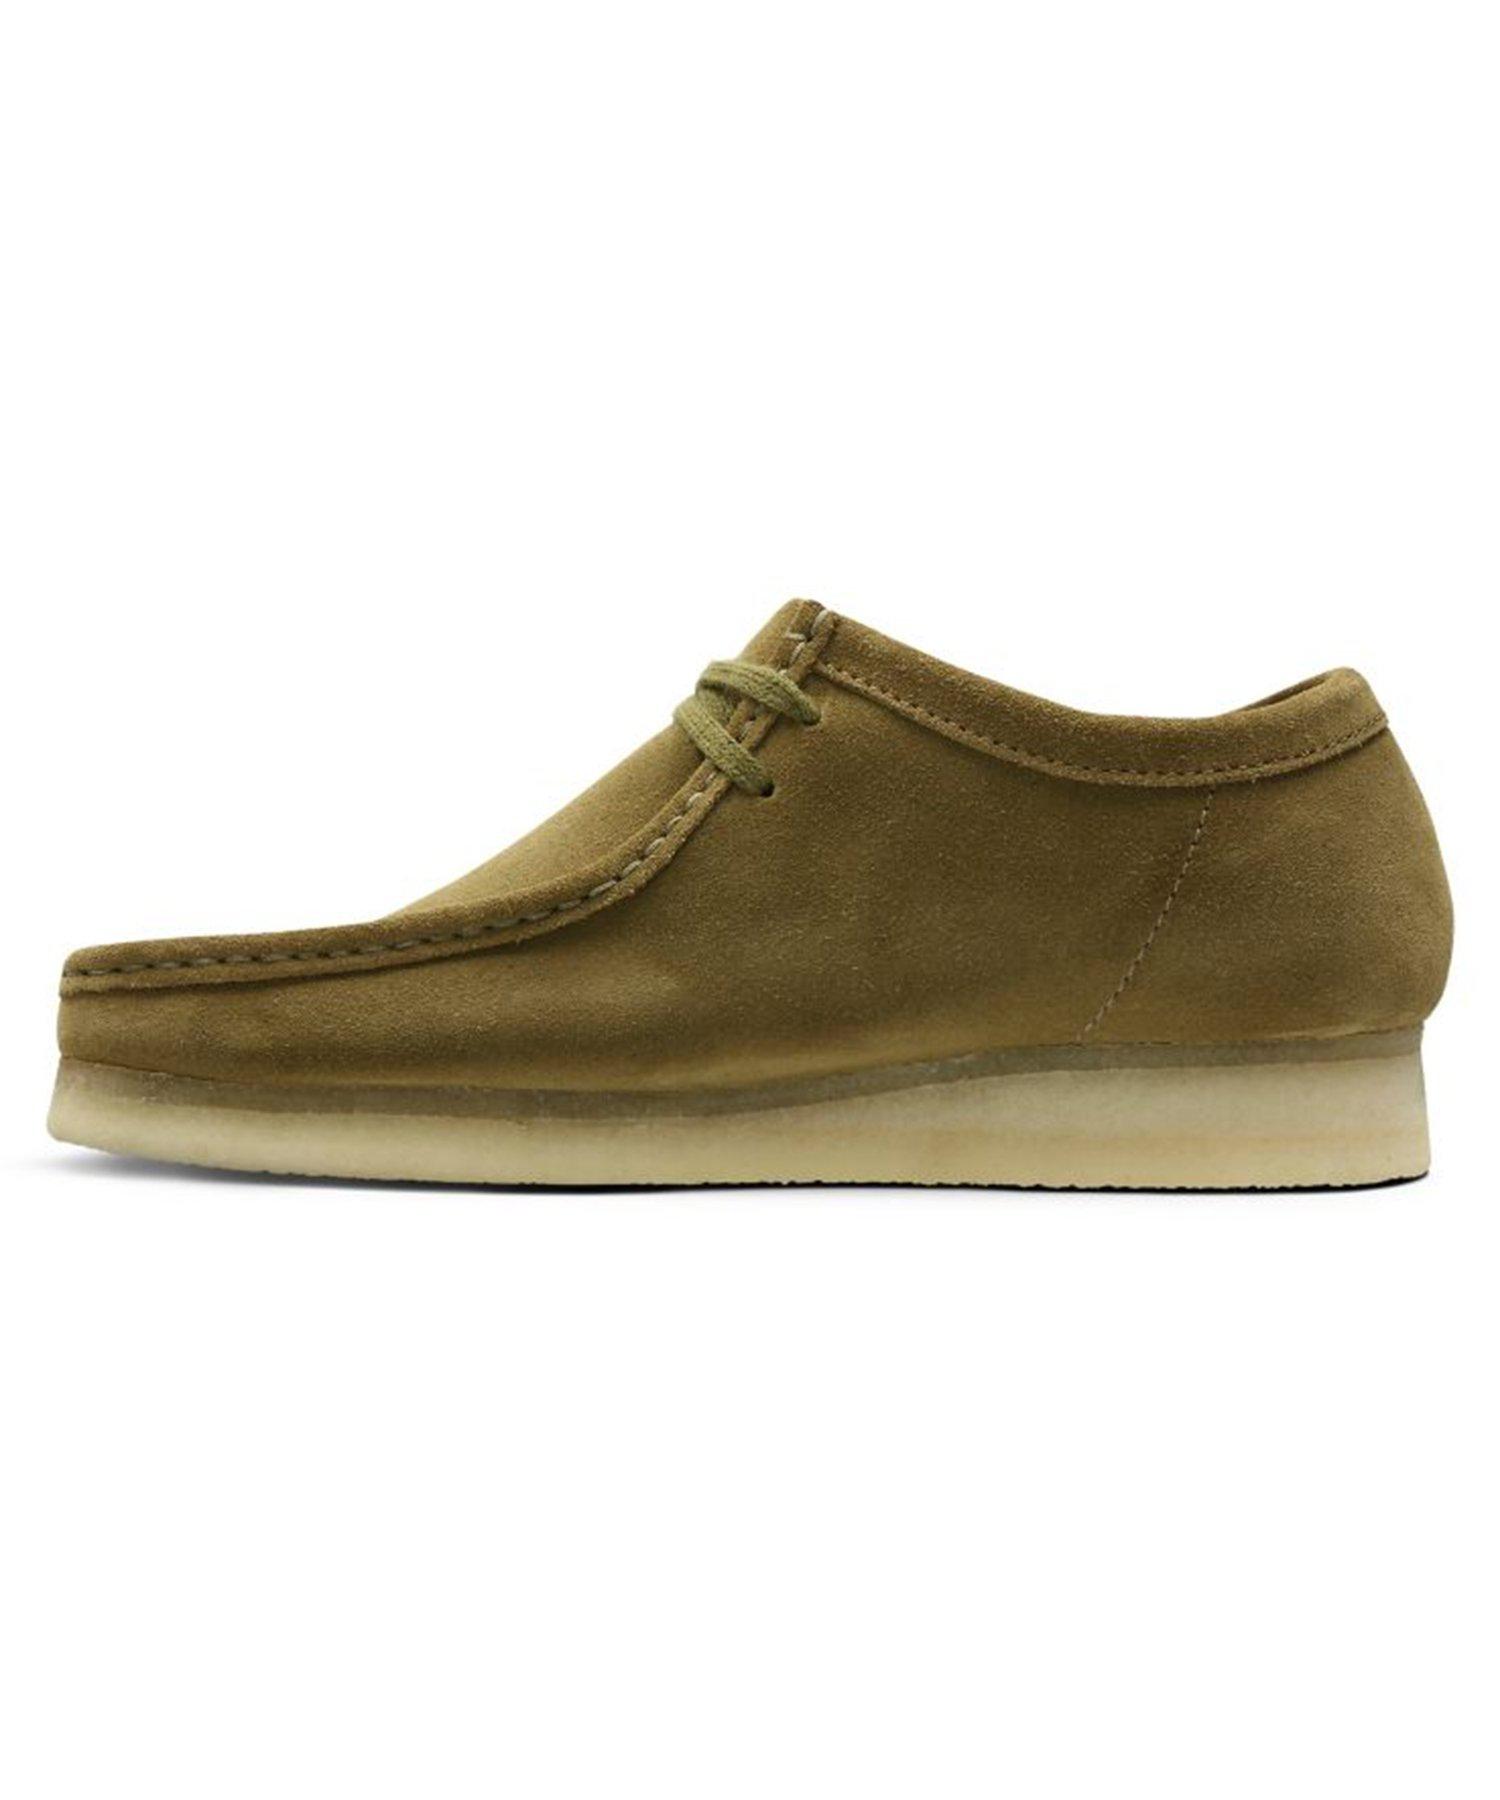 Clarks Wallabee Olive Suede in Green for Men - Lyst